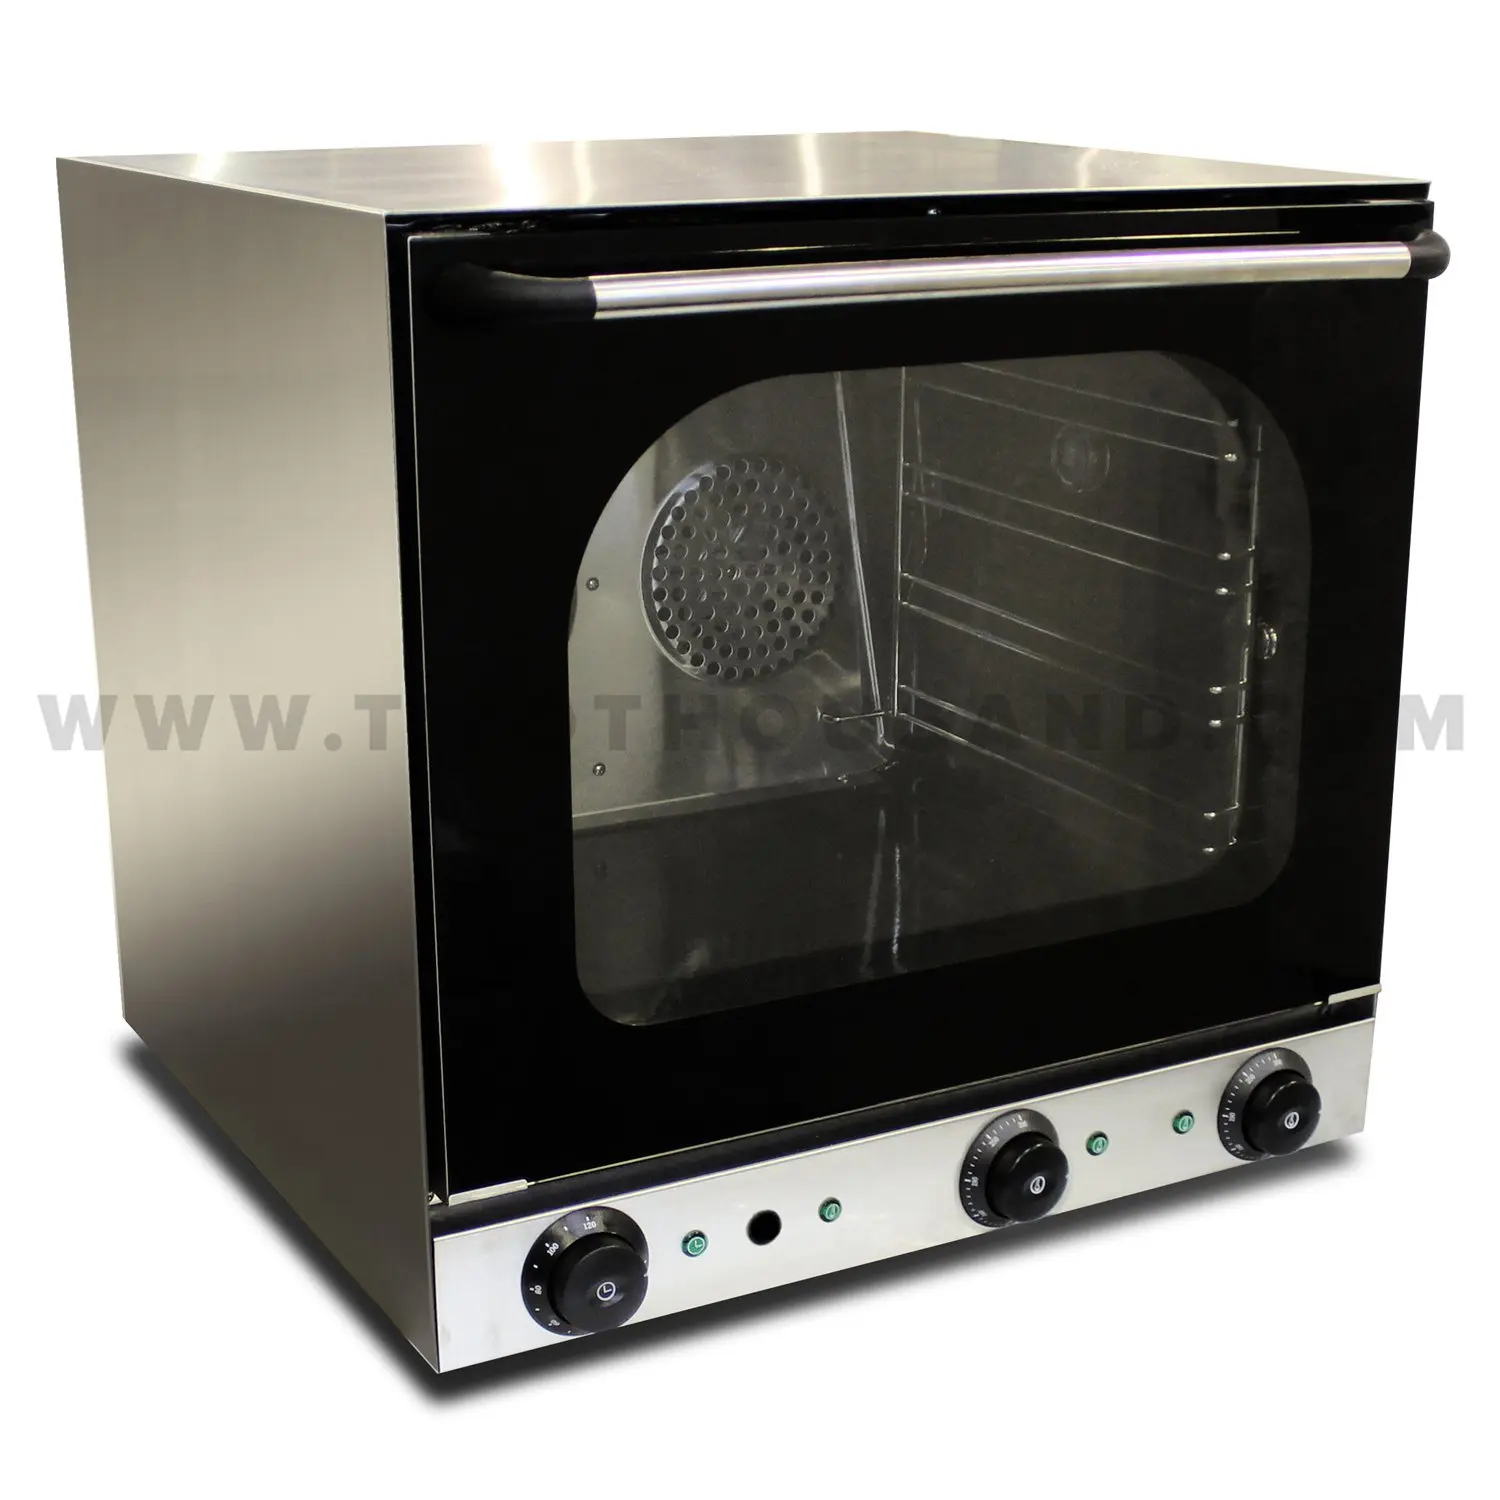 Convection oven price